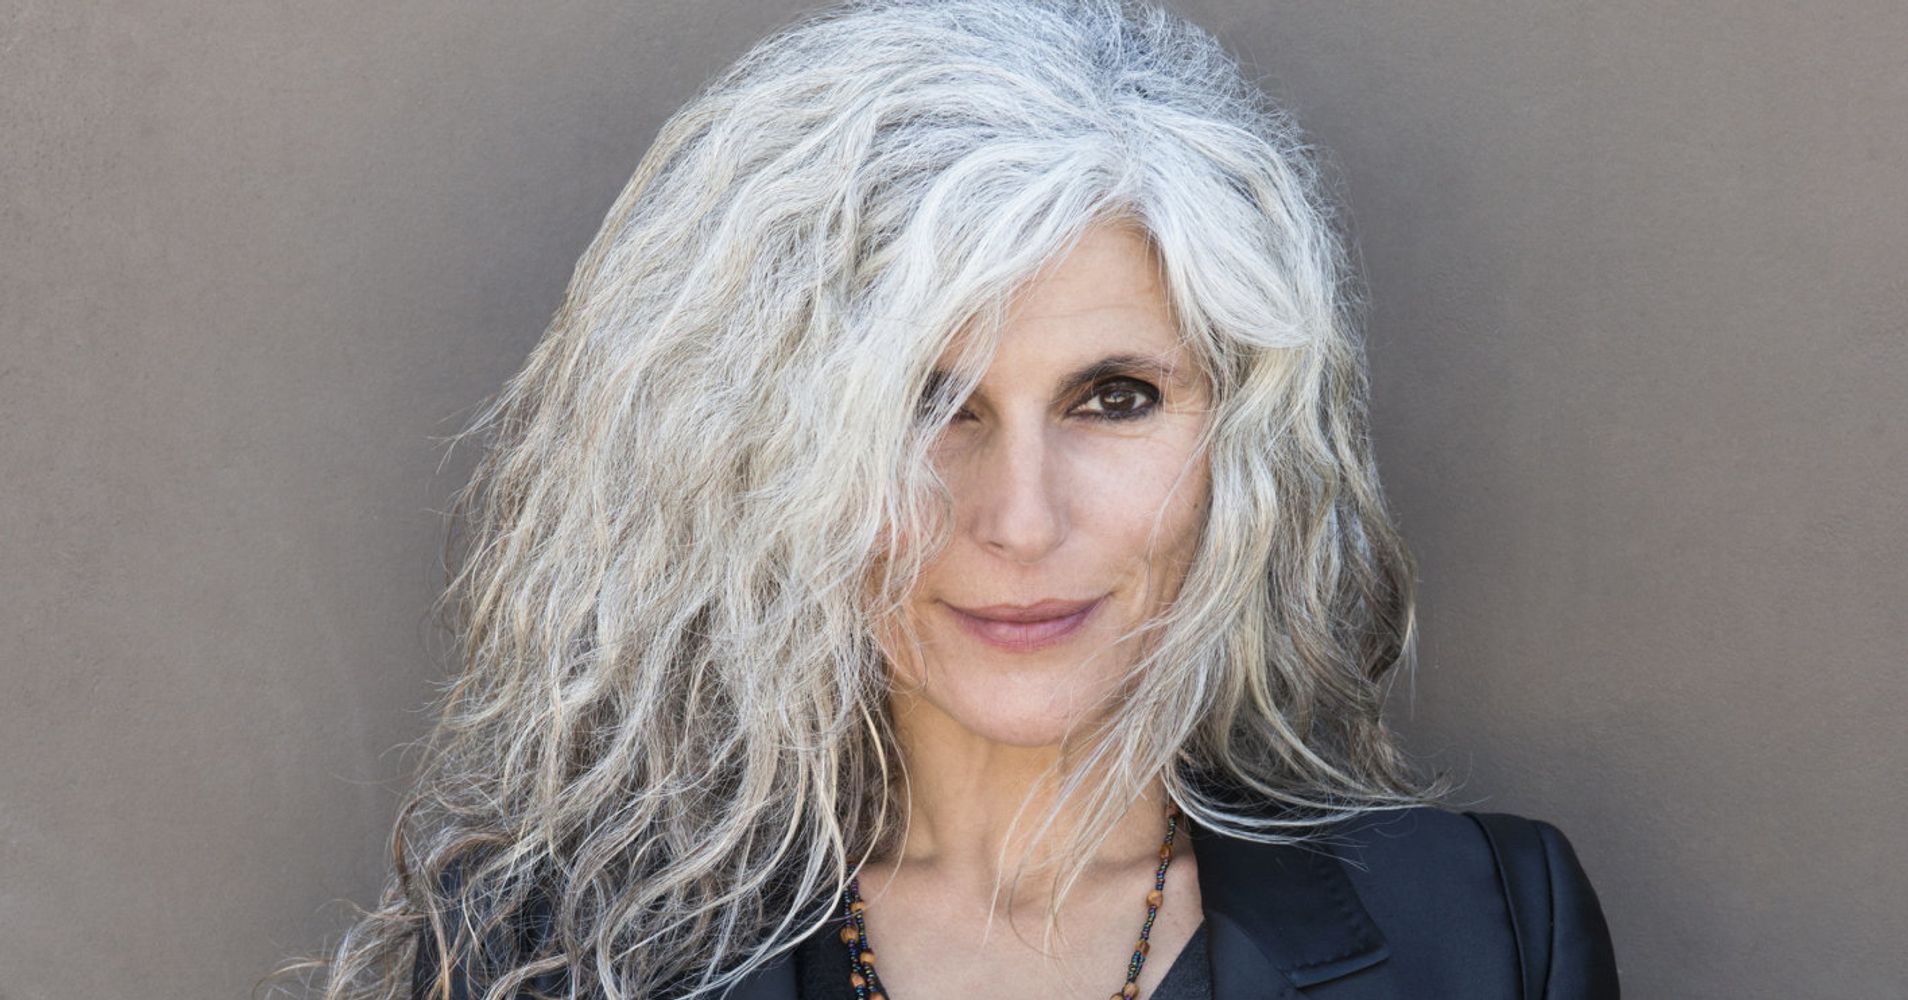 17 Hairstyles That Prove Going Gray (And White) Is Gorgeous | HuffPost